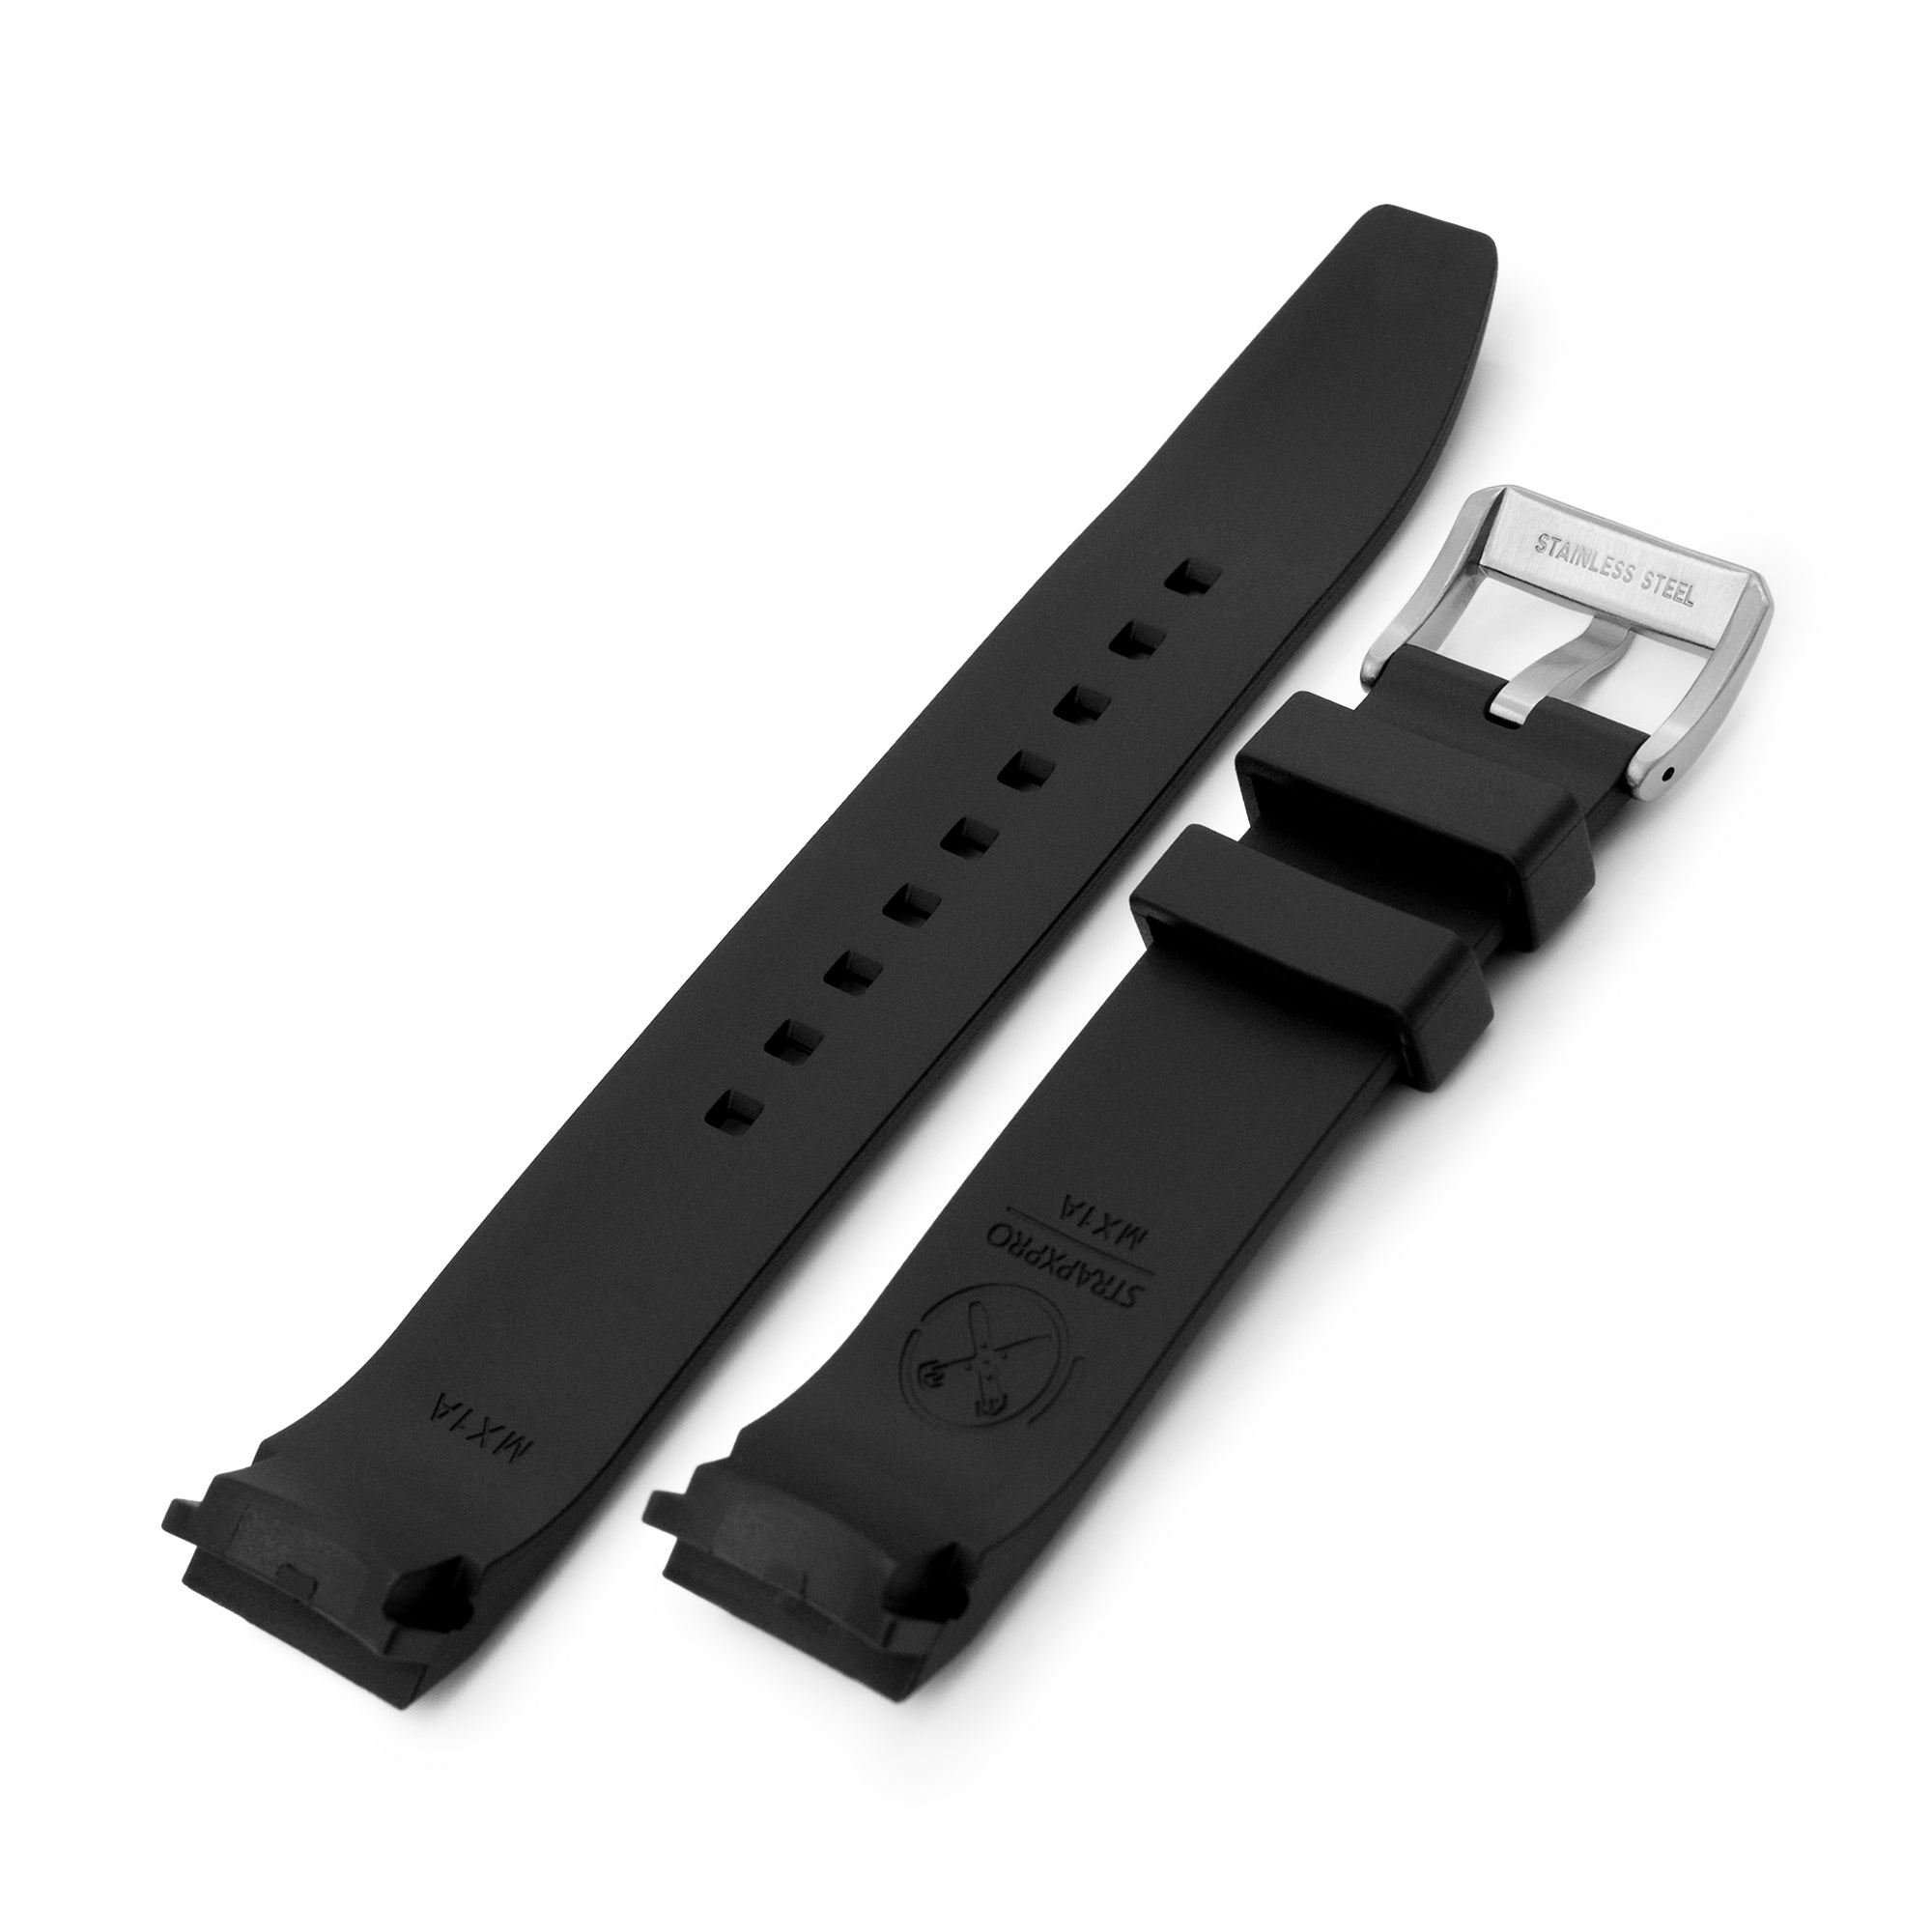 StrapXPro Lite - MX1A Rubber Strap for New Seiko Monster 4th Gen., Black Strapcode Watch Bands